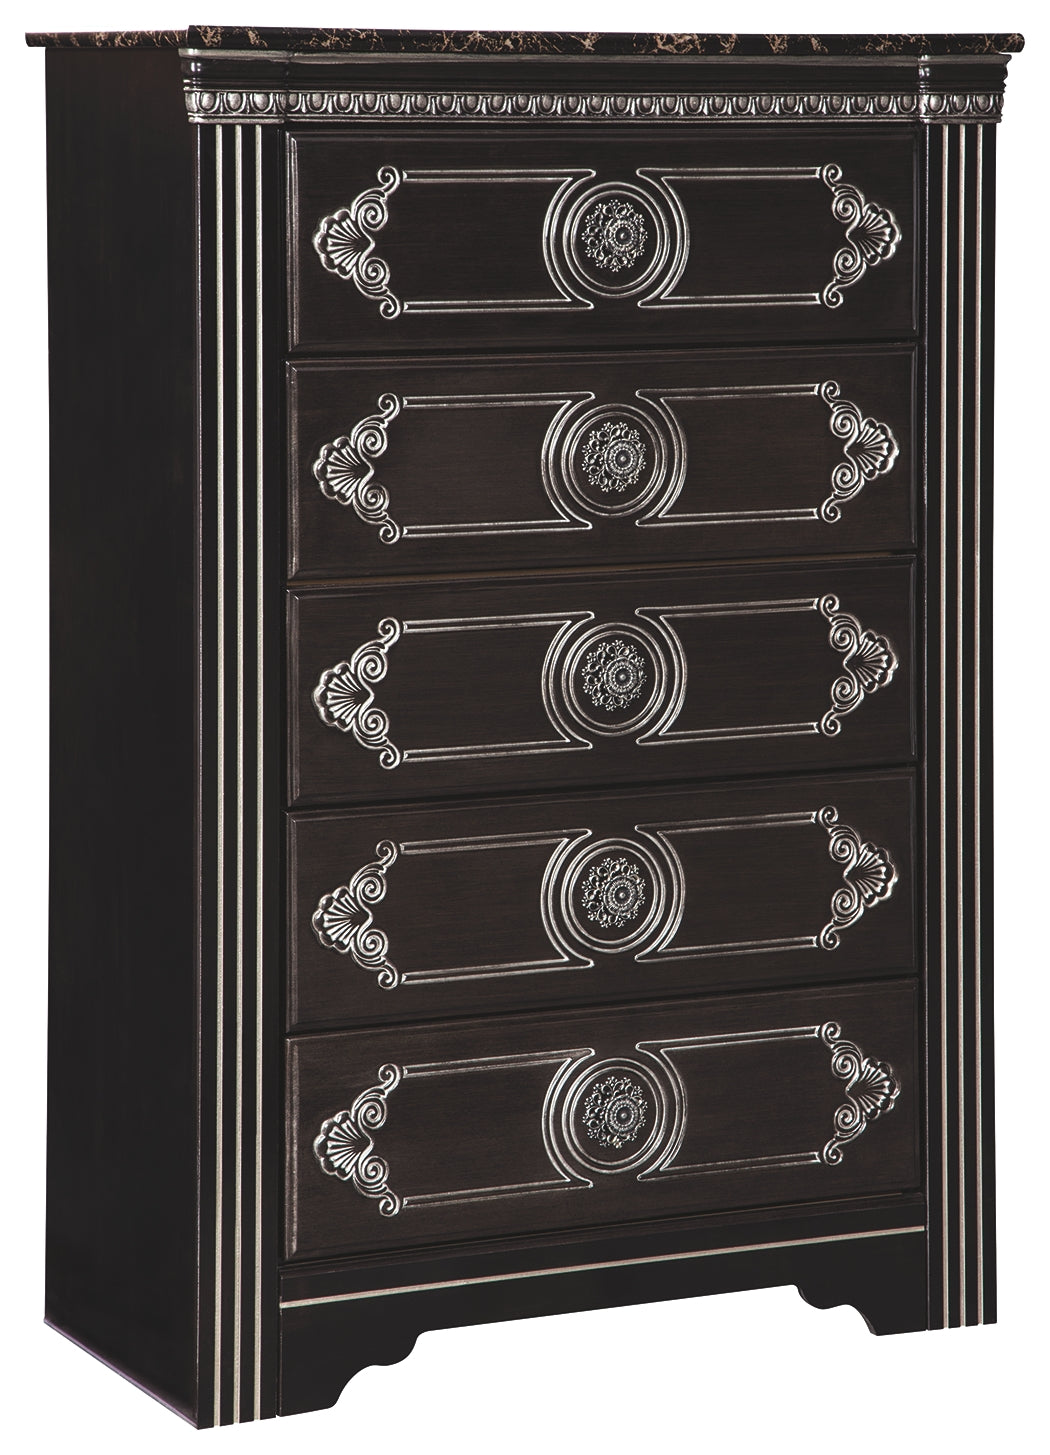 Banalski Signature Design by Ashley Chest of Drawers